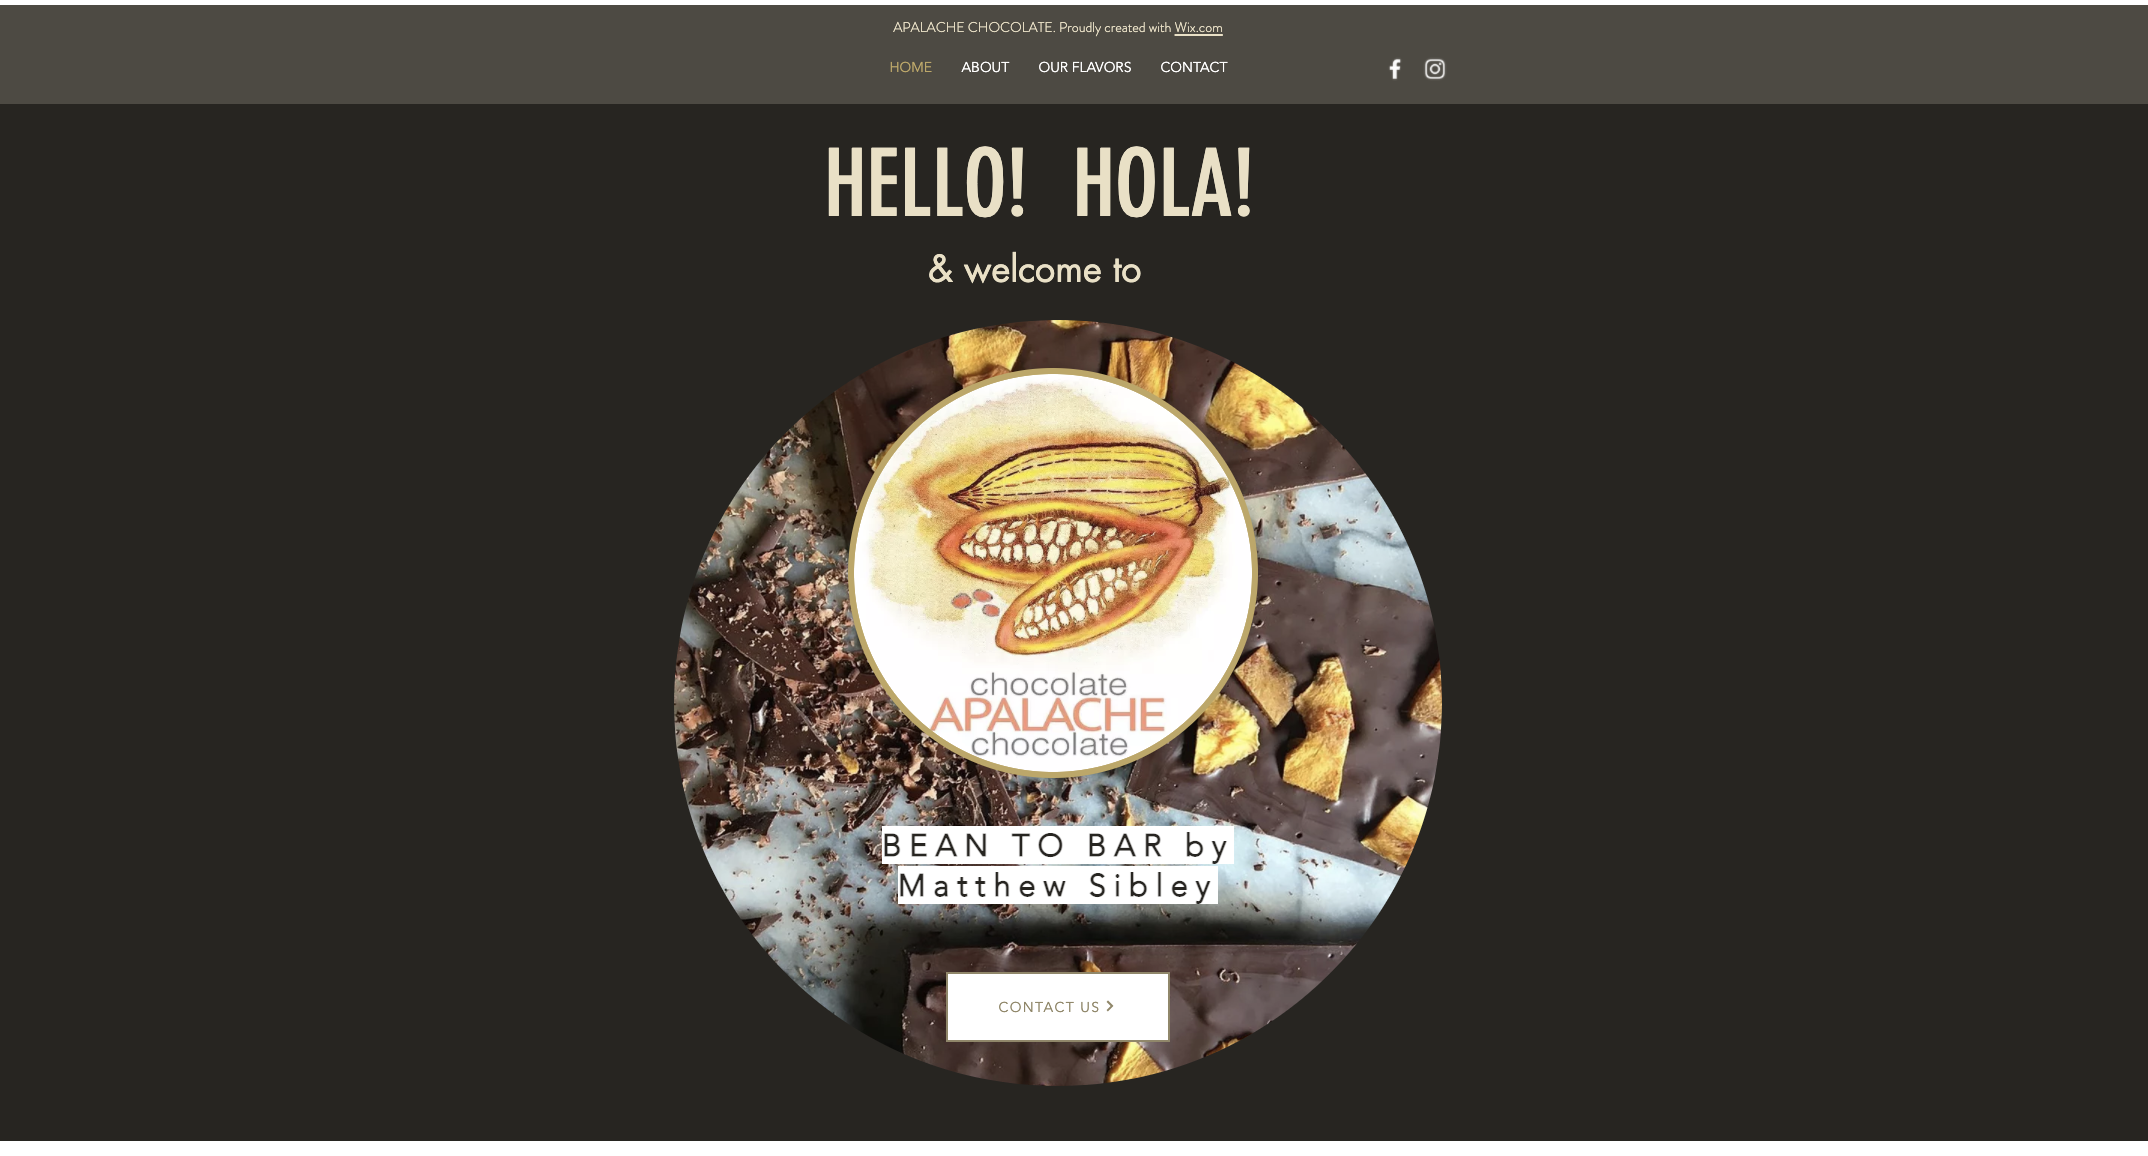 The first panel of the Apalache Chocolate website, featuring the logo.